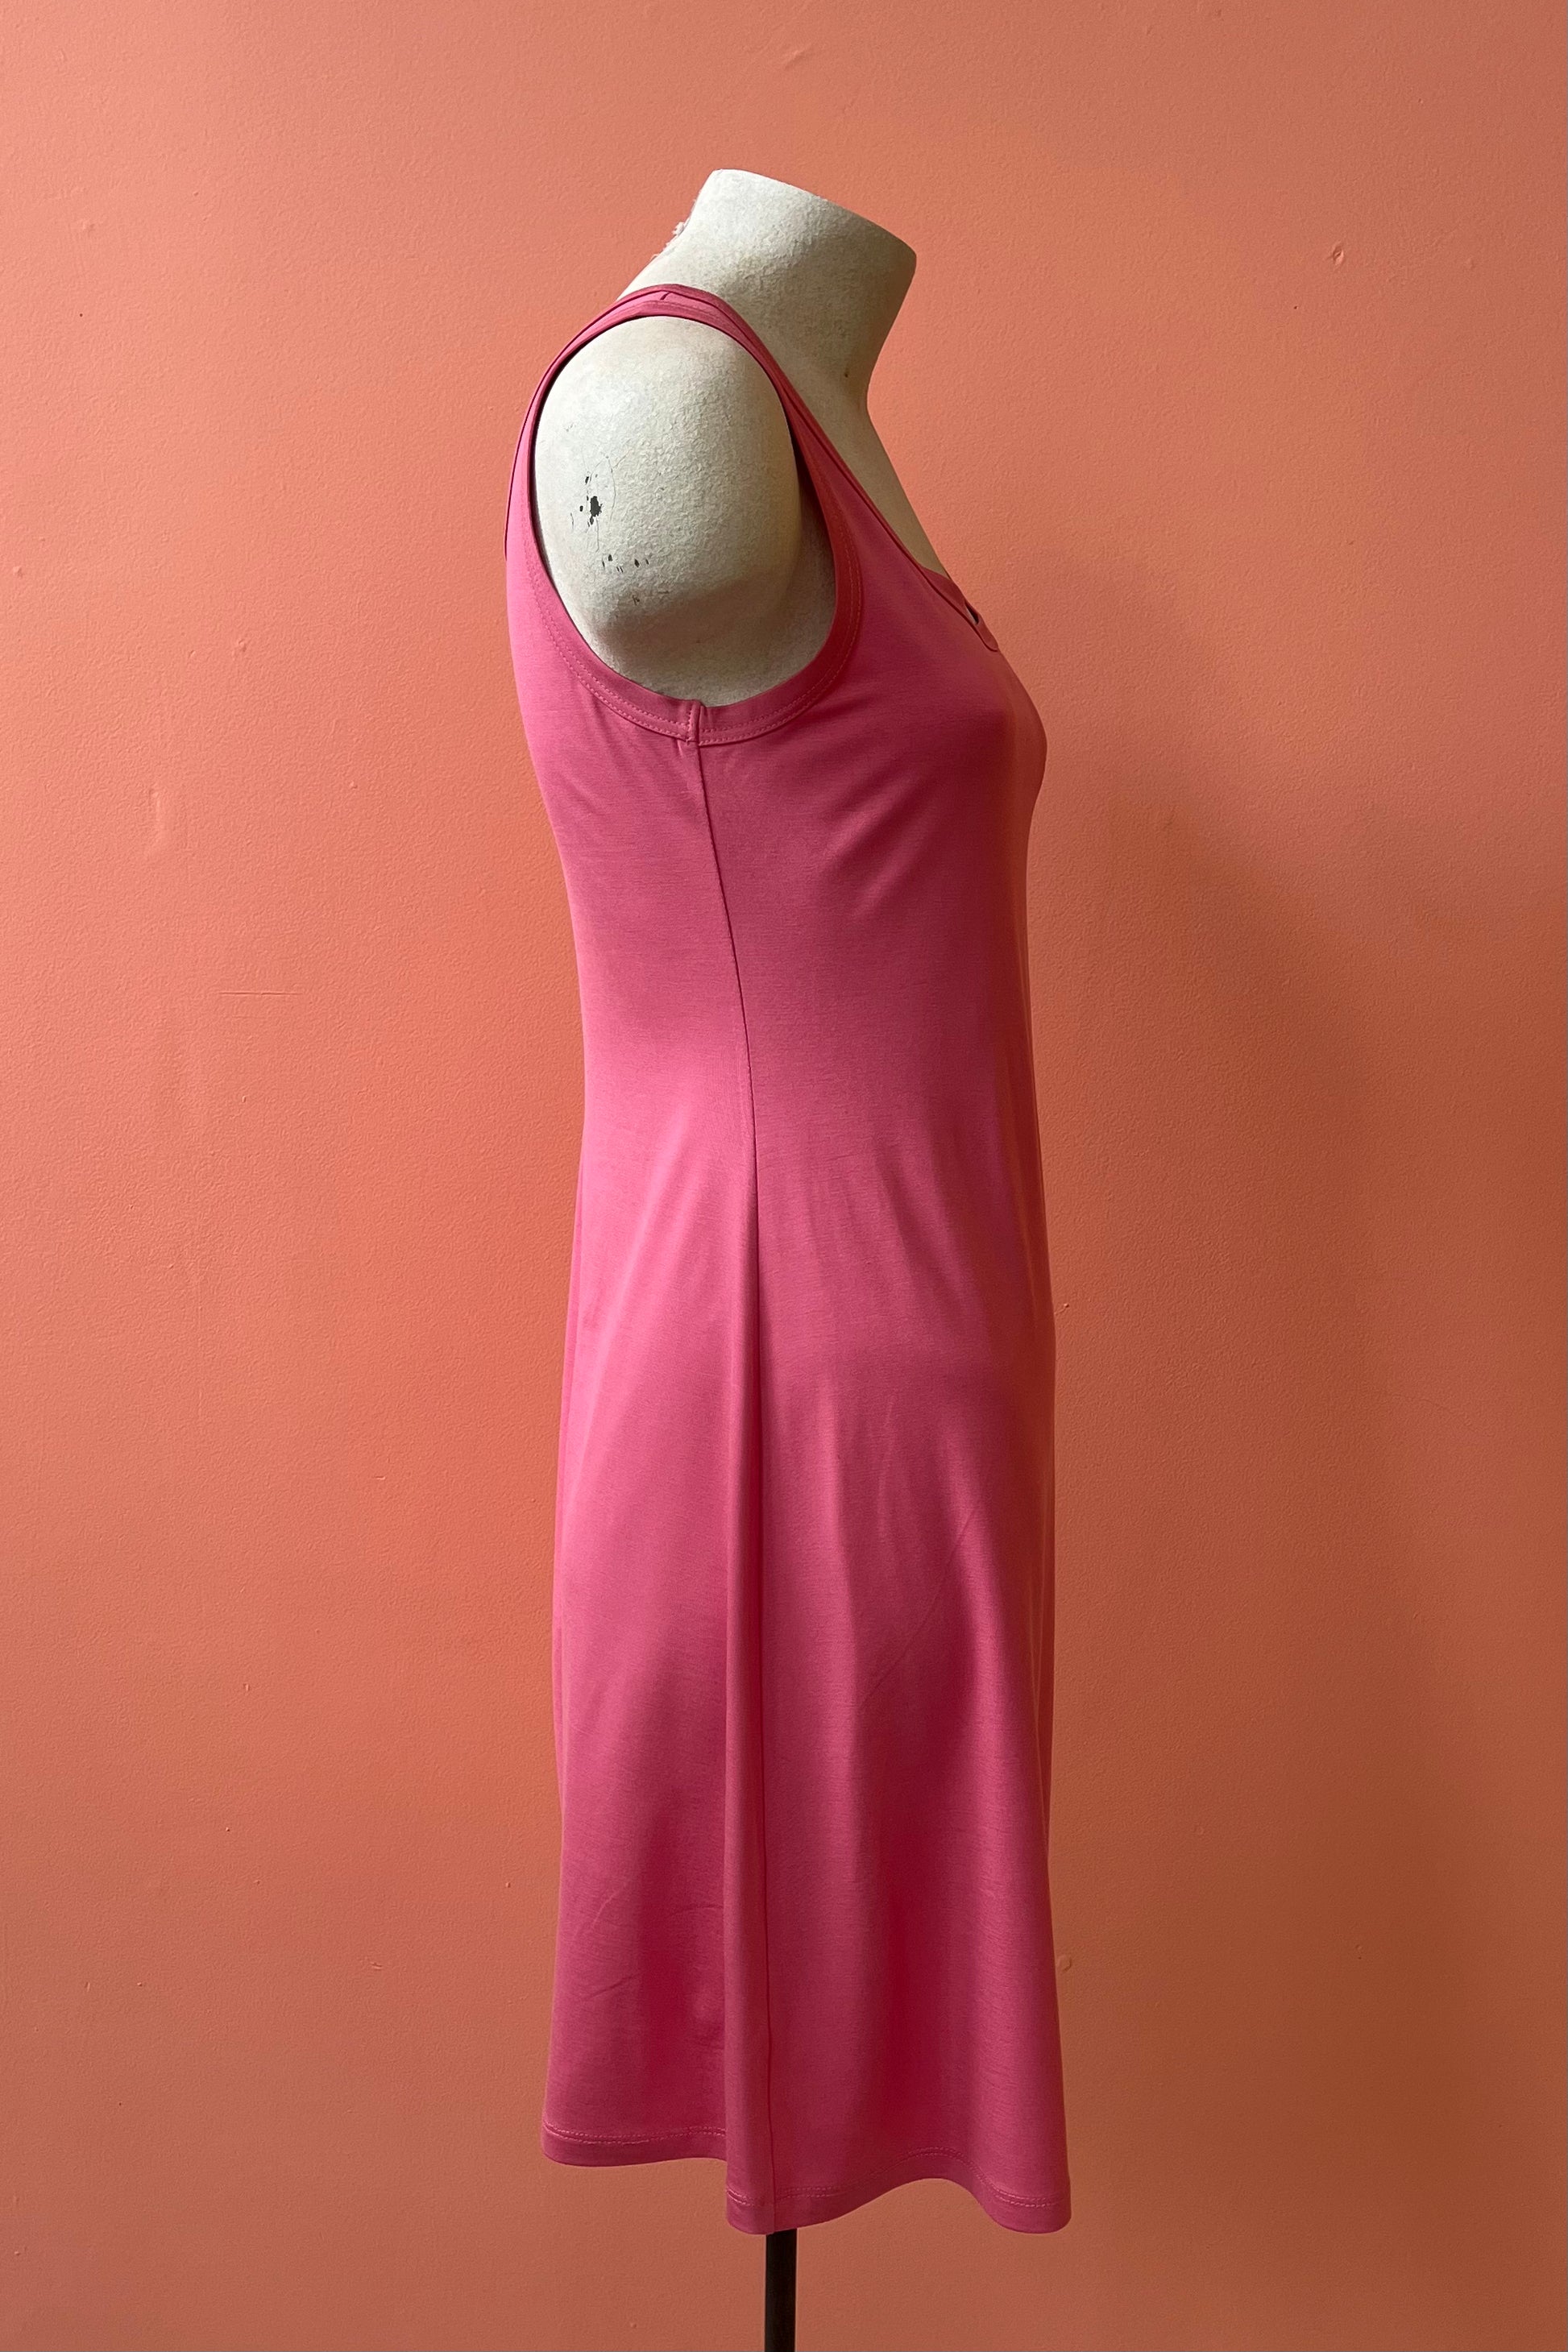 B-Dress by Yul Voy, Coral, side view, tank dress, wide straps, scoop neck front and back, A-line shape, above the knee, sizes XS to XXL, made in Montreal